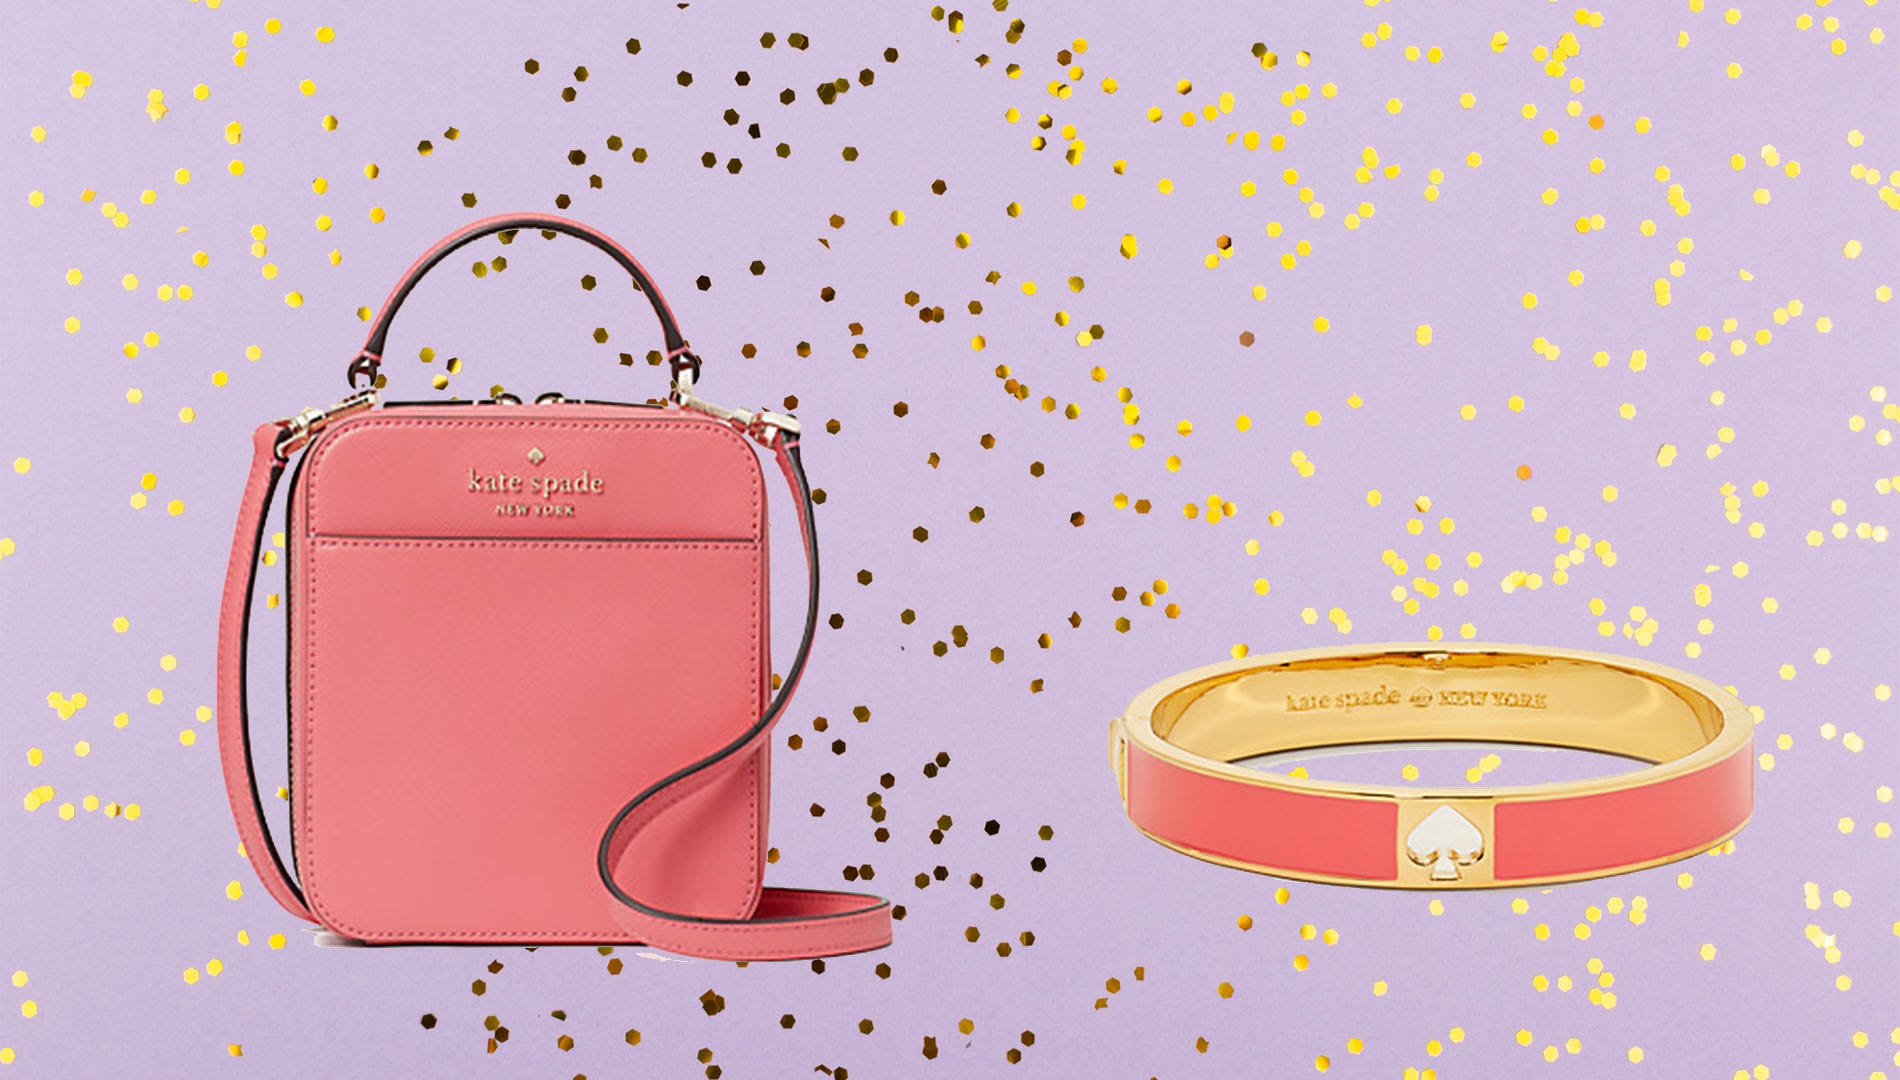 Kate Spade Surprise: The best purses, wallets and more up to 78% off